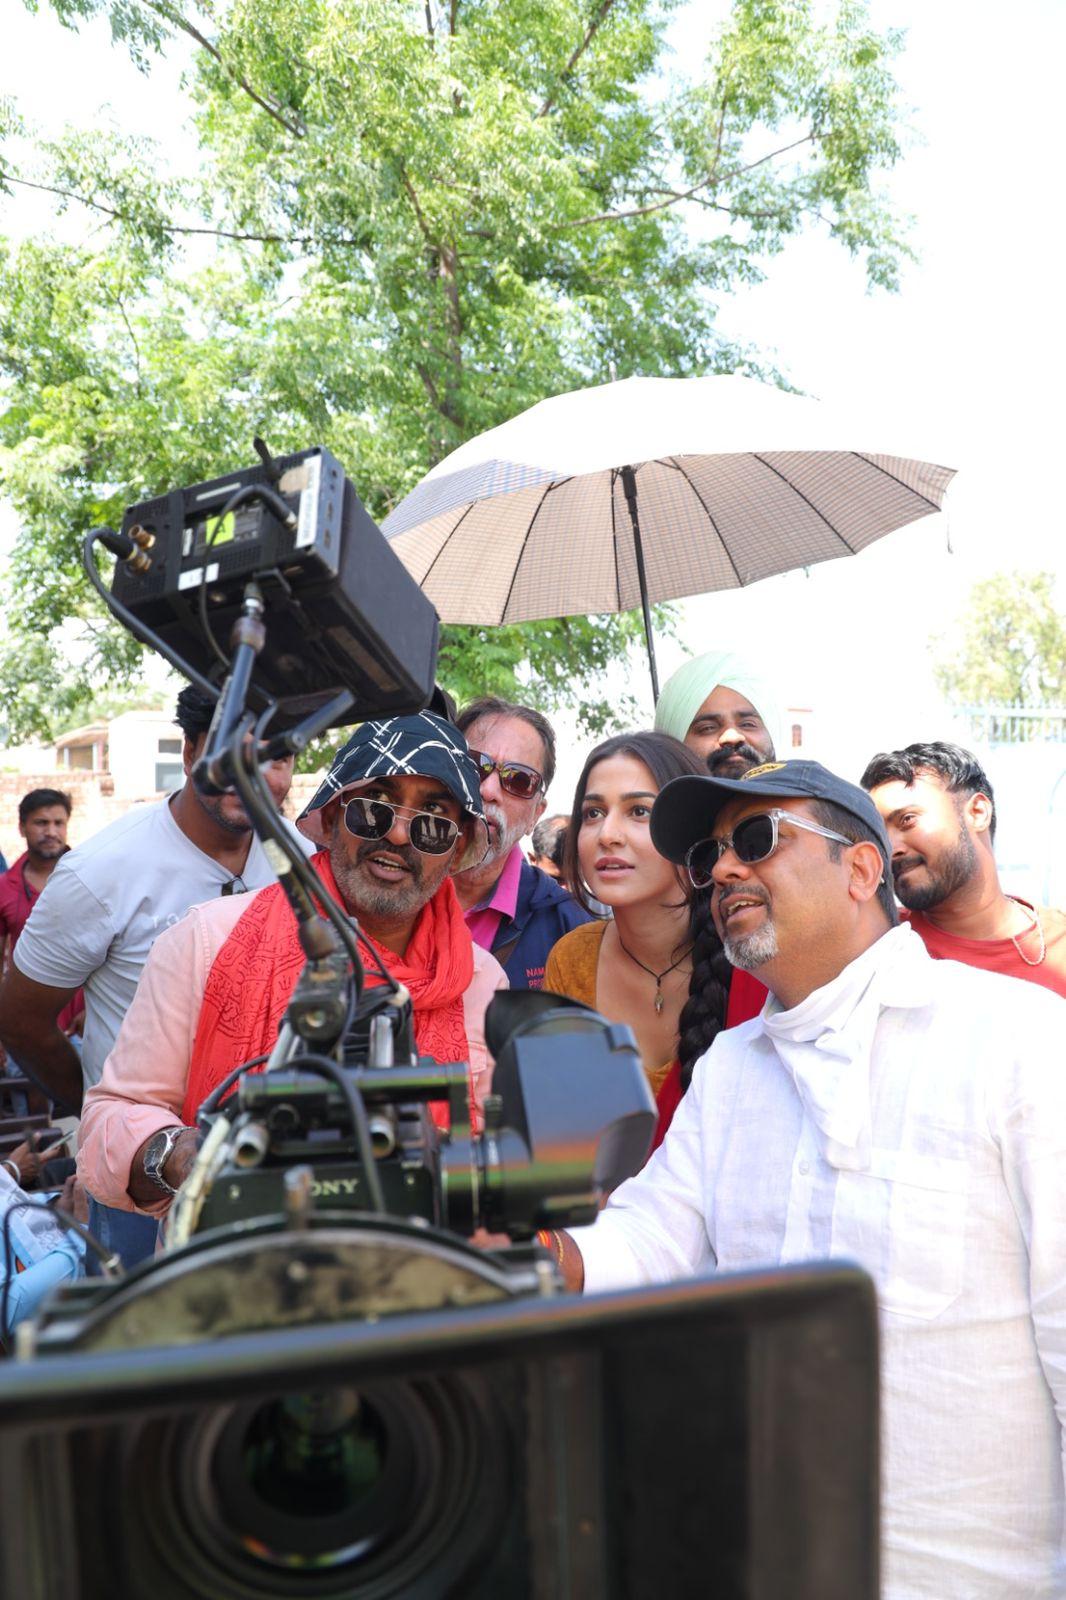 The BTS shows Amandeep Sidhu checking out the shots in camera and the smile on her face shows her happiness